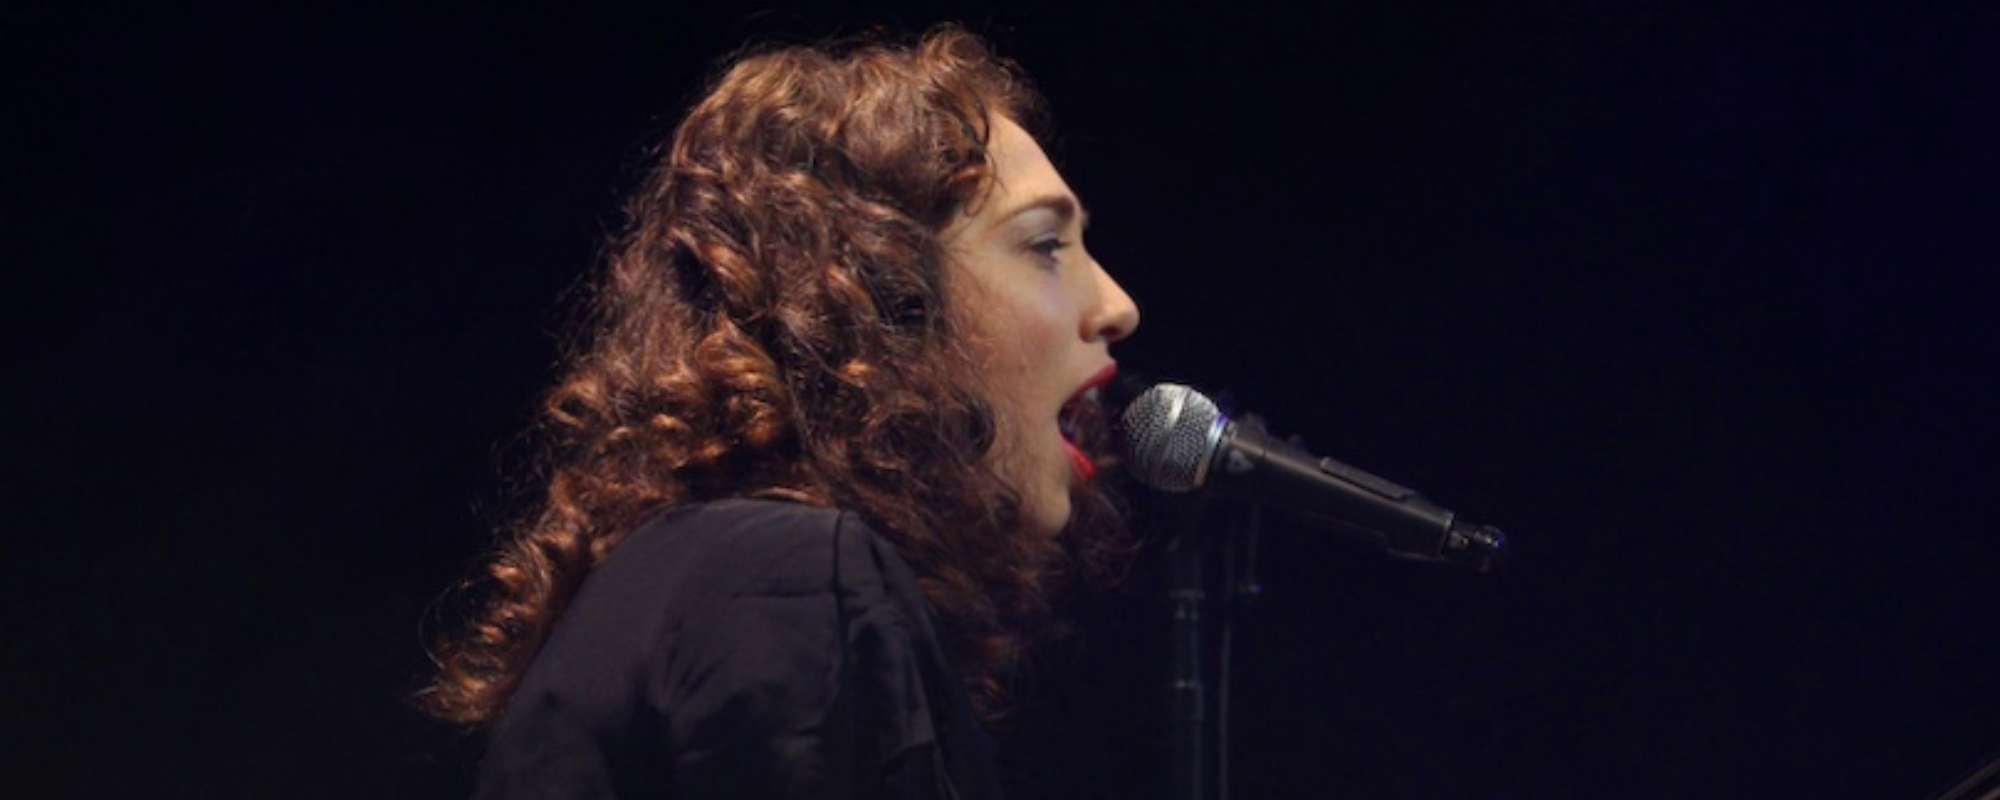 5 Questions for Regina Spektor: “Professionally and Personally I Hope for Peace”